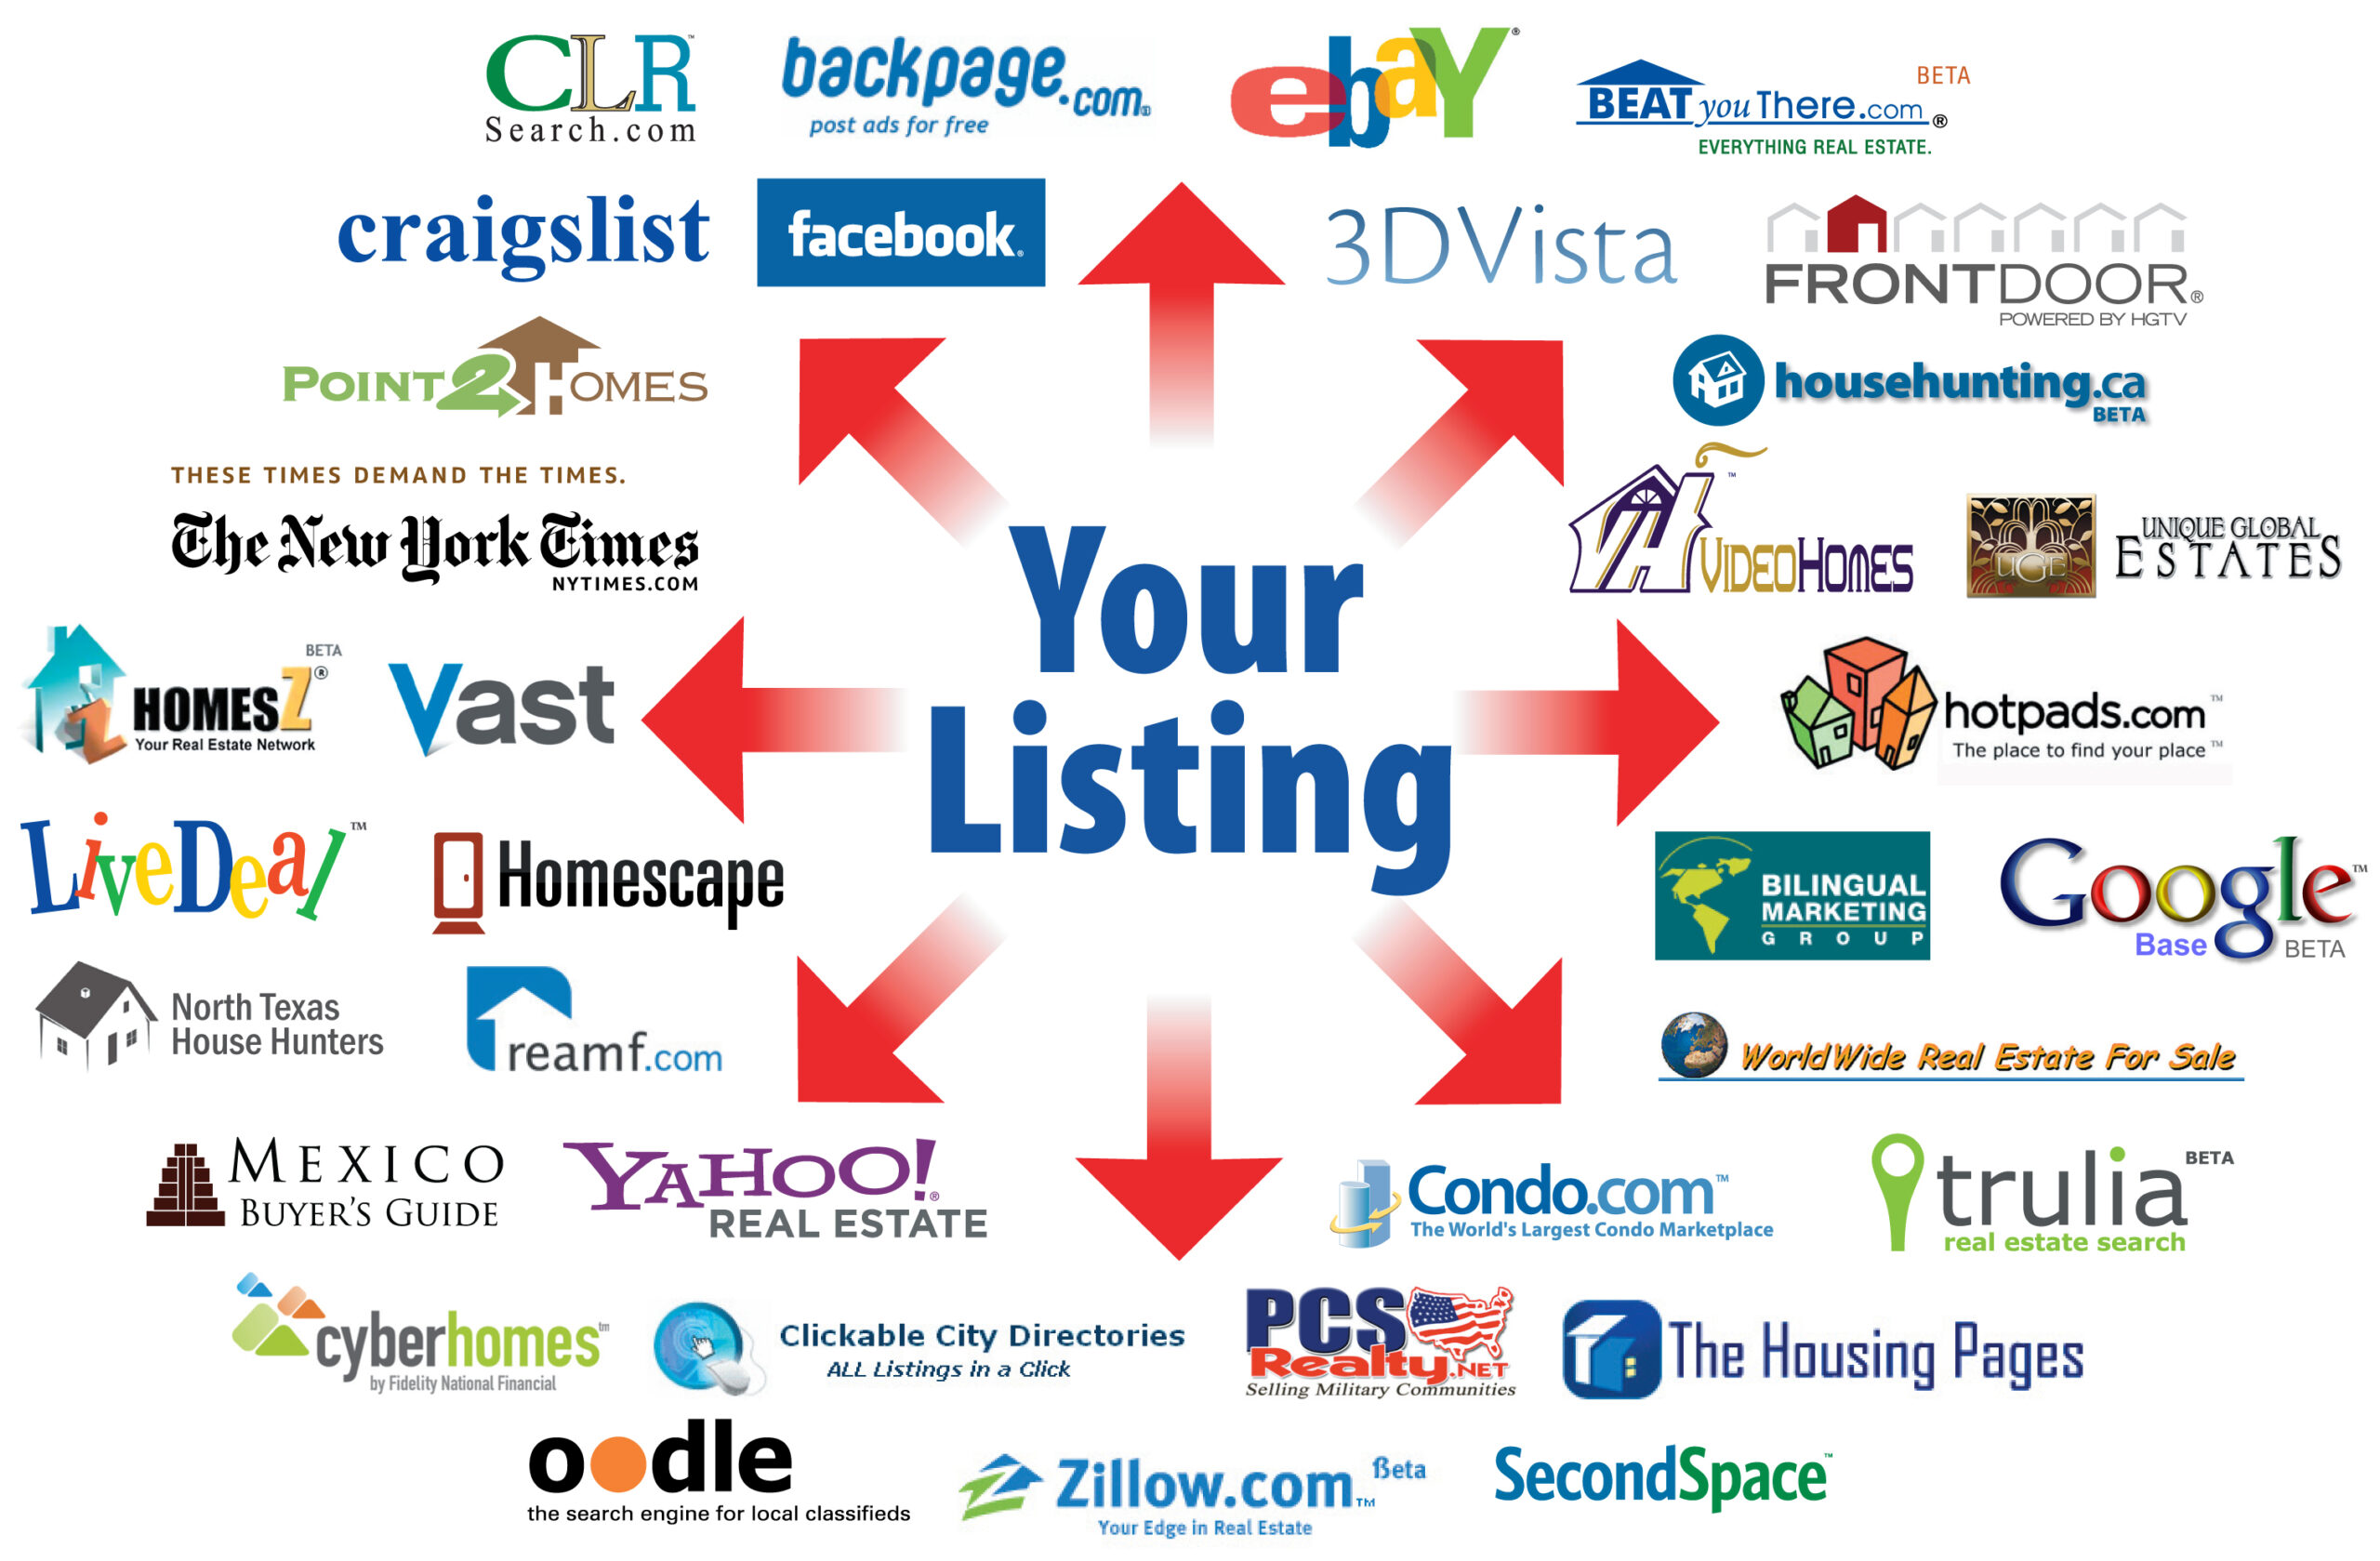 List Your Home For Sale - Sell Your House